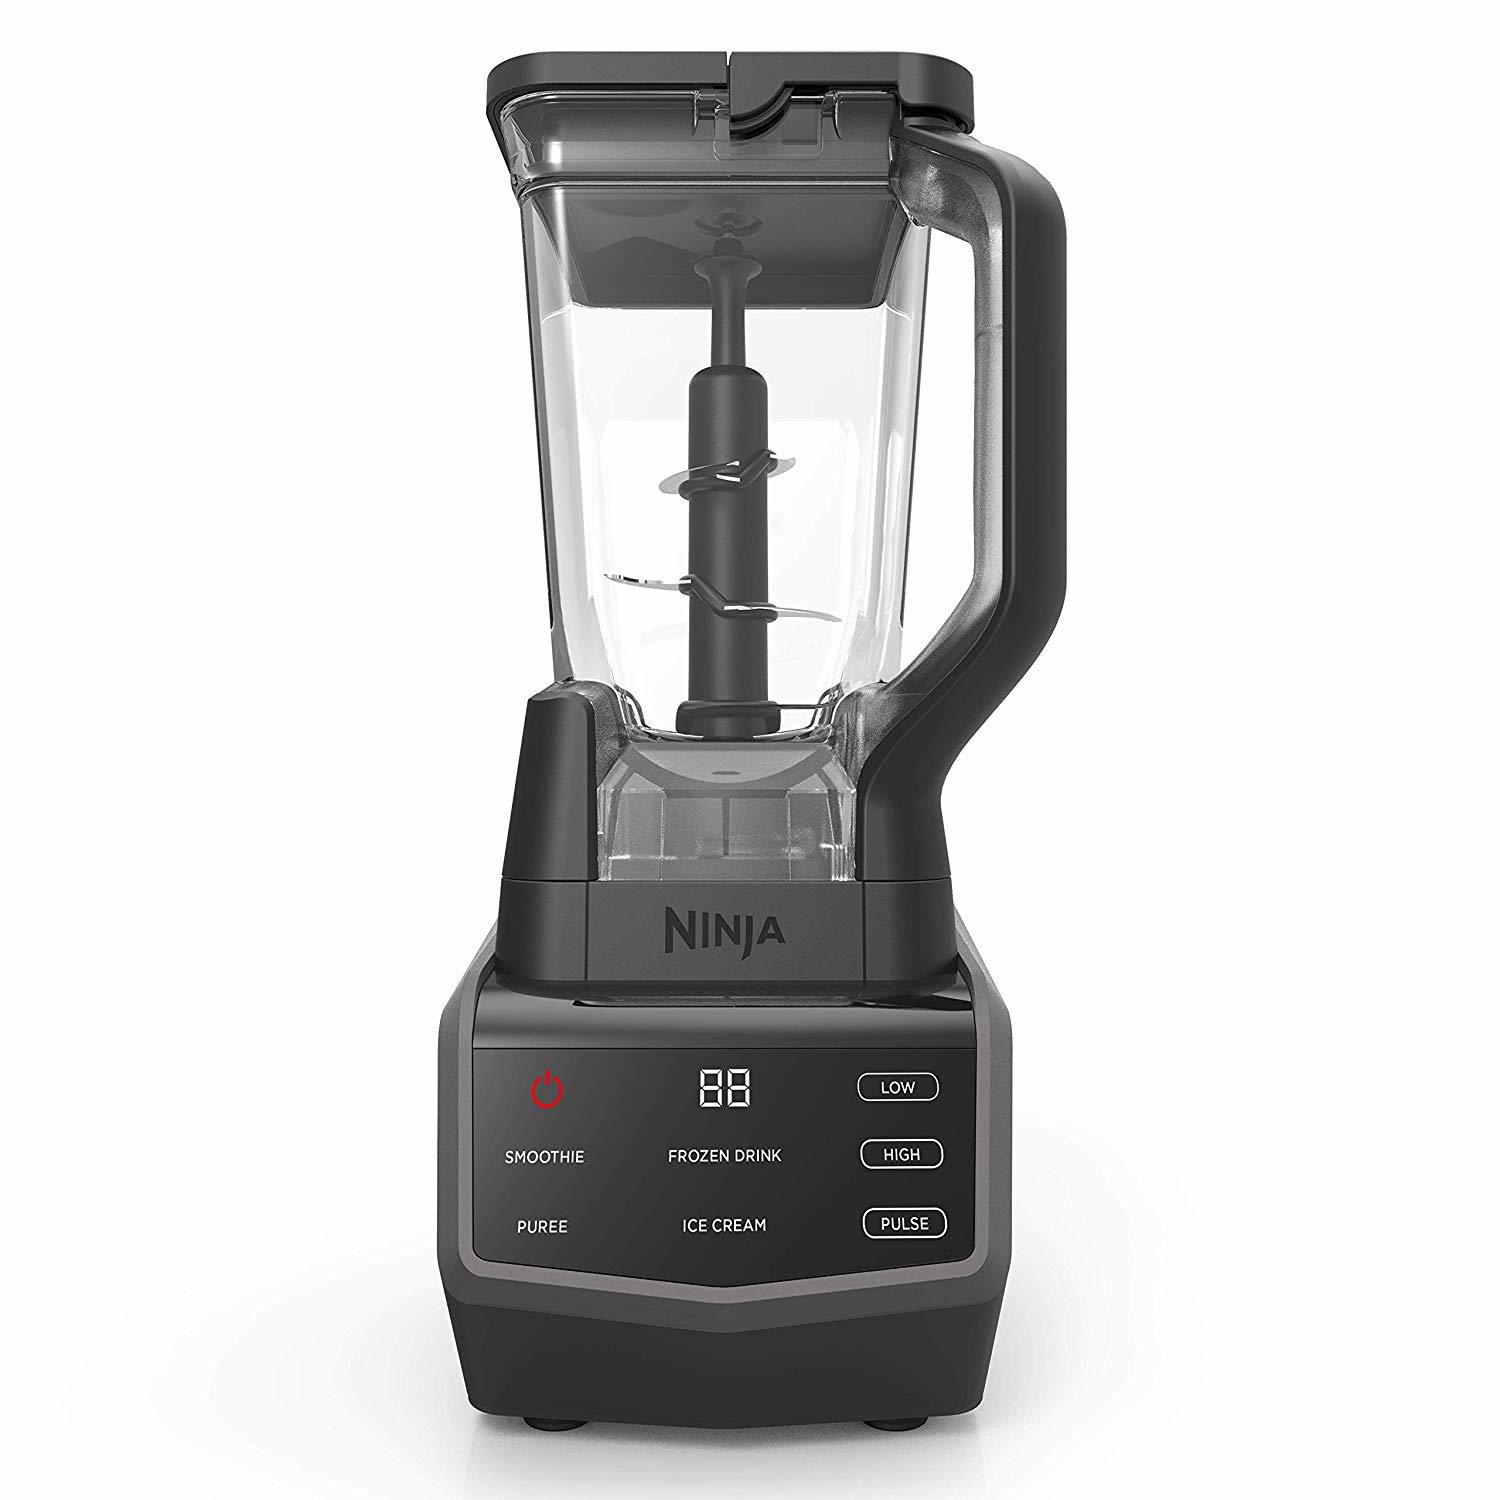 Ninja Smart Screen Touchscreen Display Auto-iQ Blender For $79.99 Shipped From Amazon After $50 Black Friday Savings!